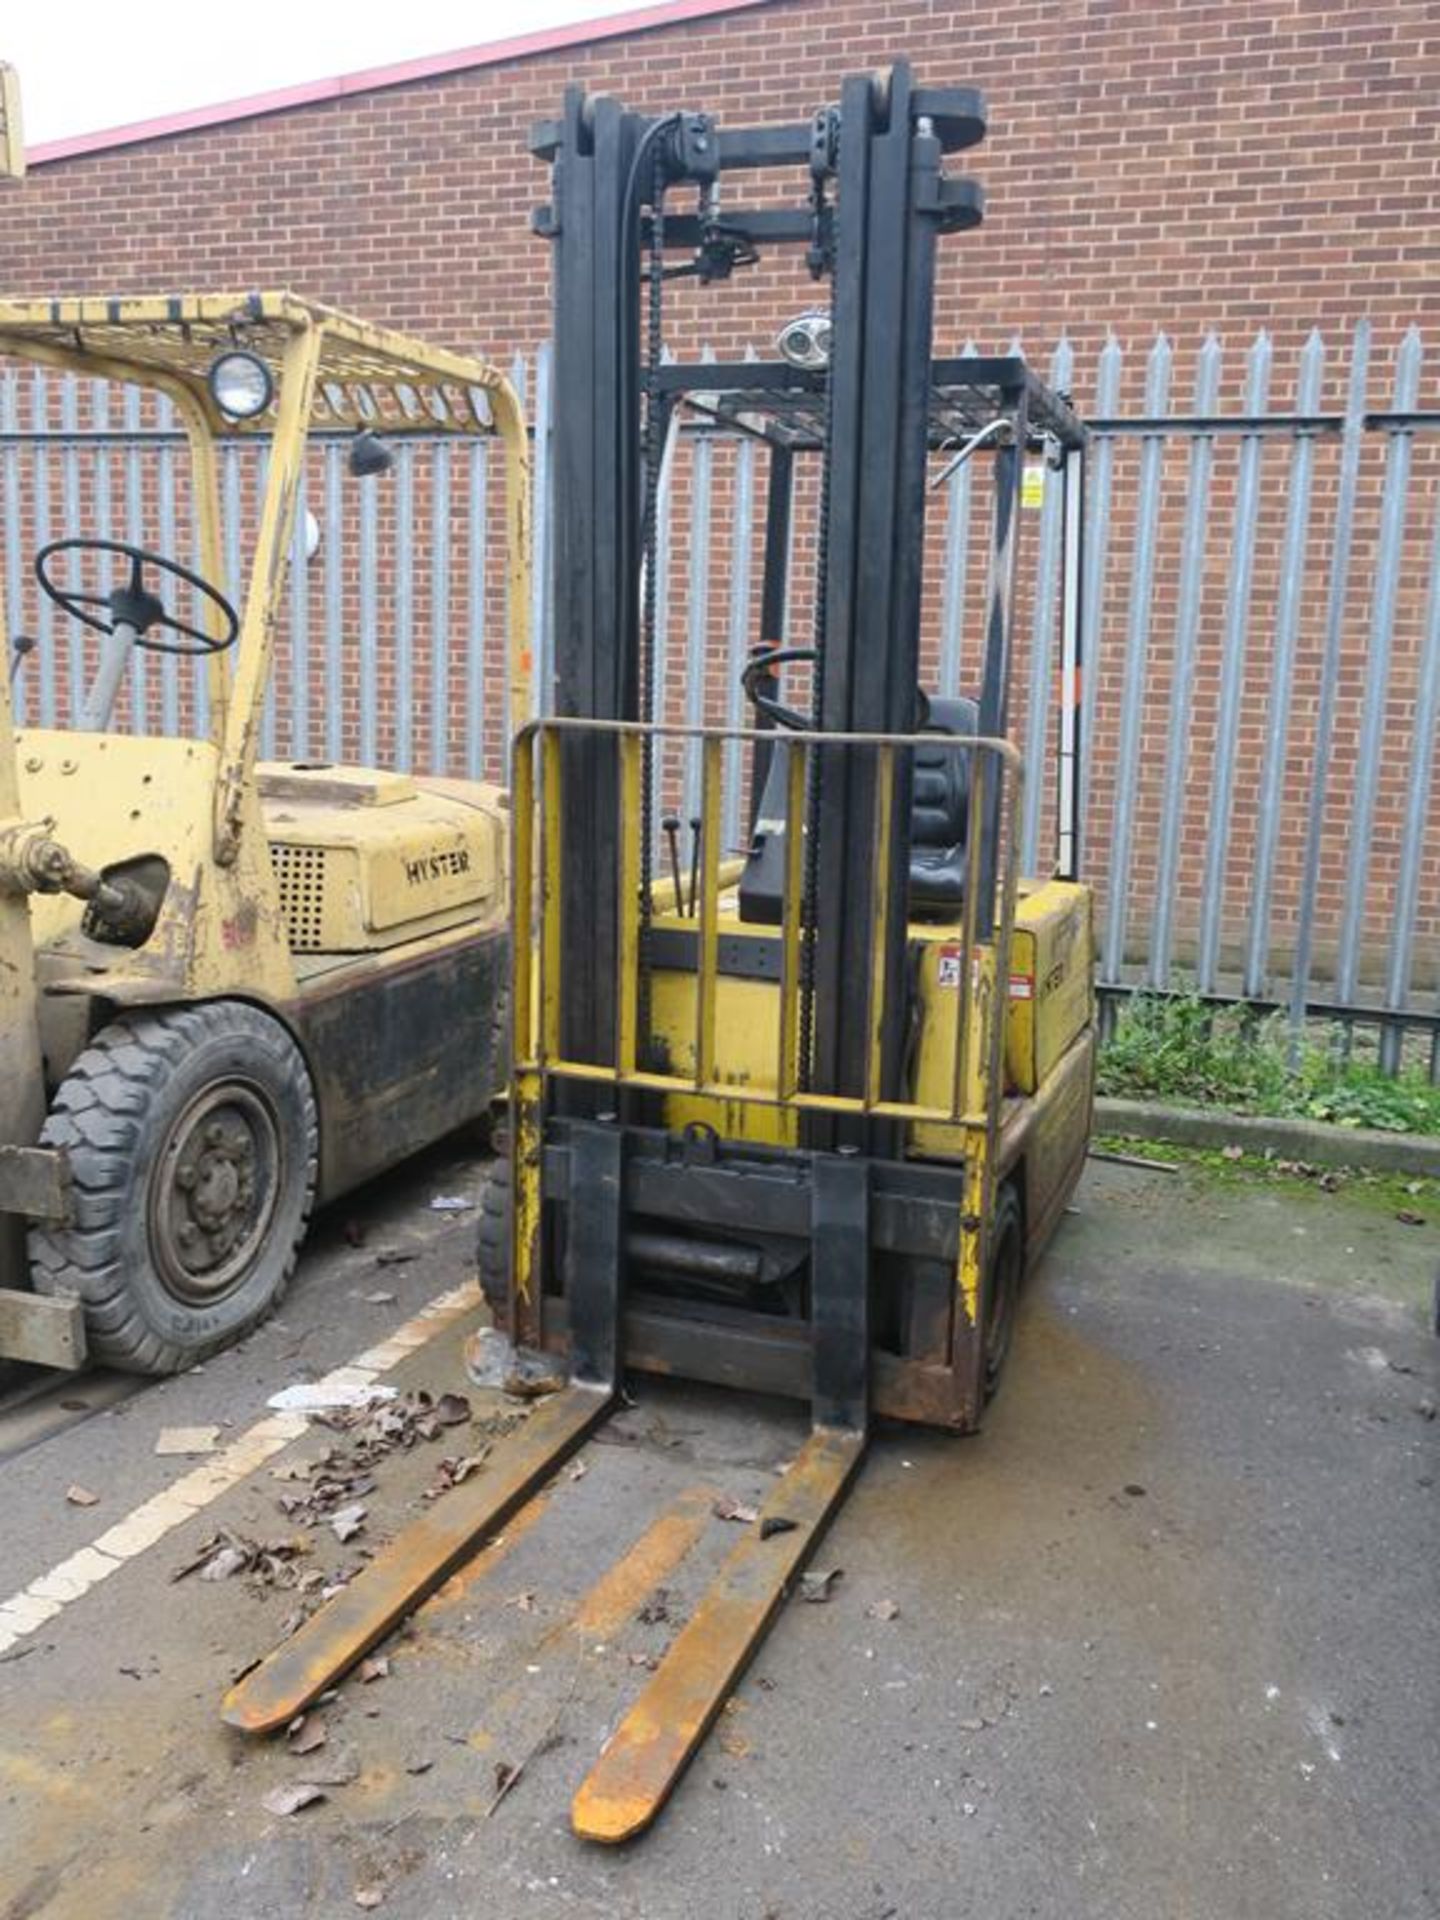 * Hyster 1.50 Electric Forklift with duplex mast and side shift, GNB 2100 LP charger. Please note - Image 7 of 9